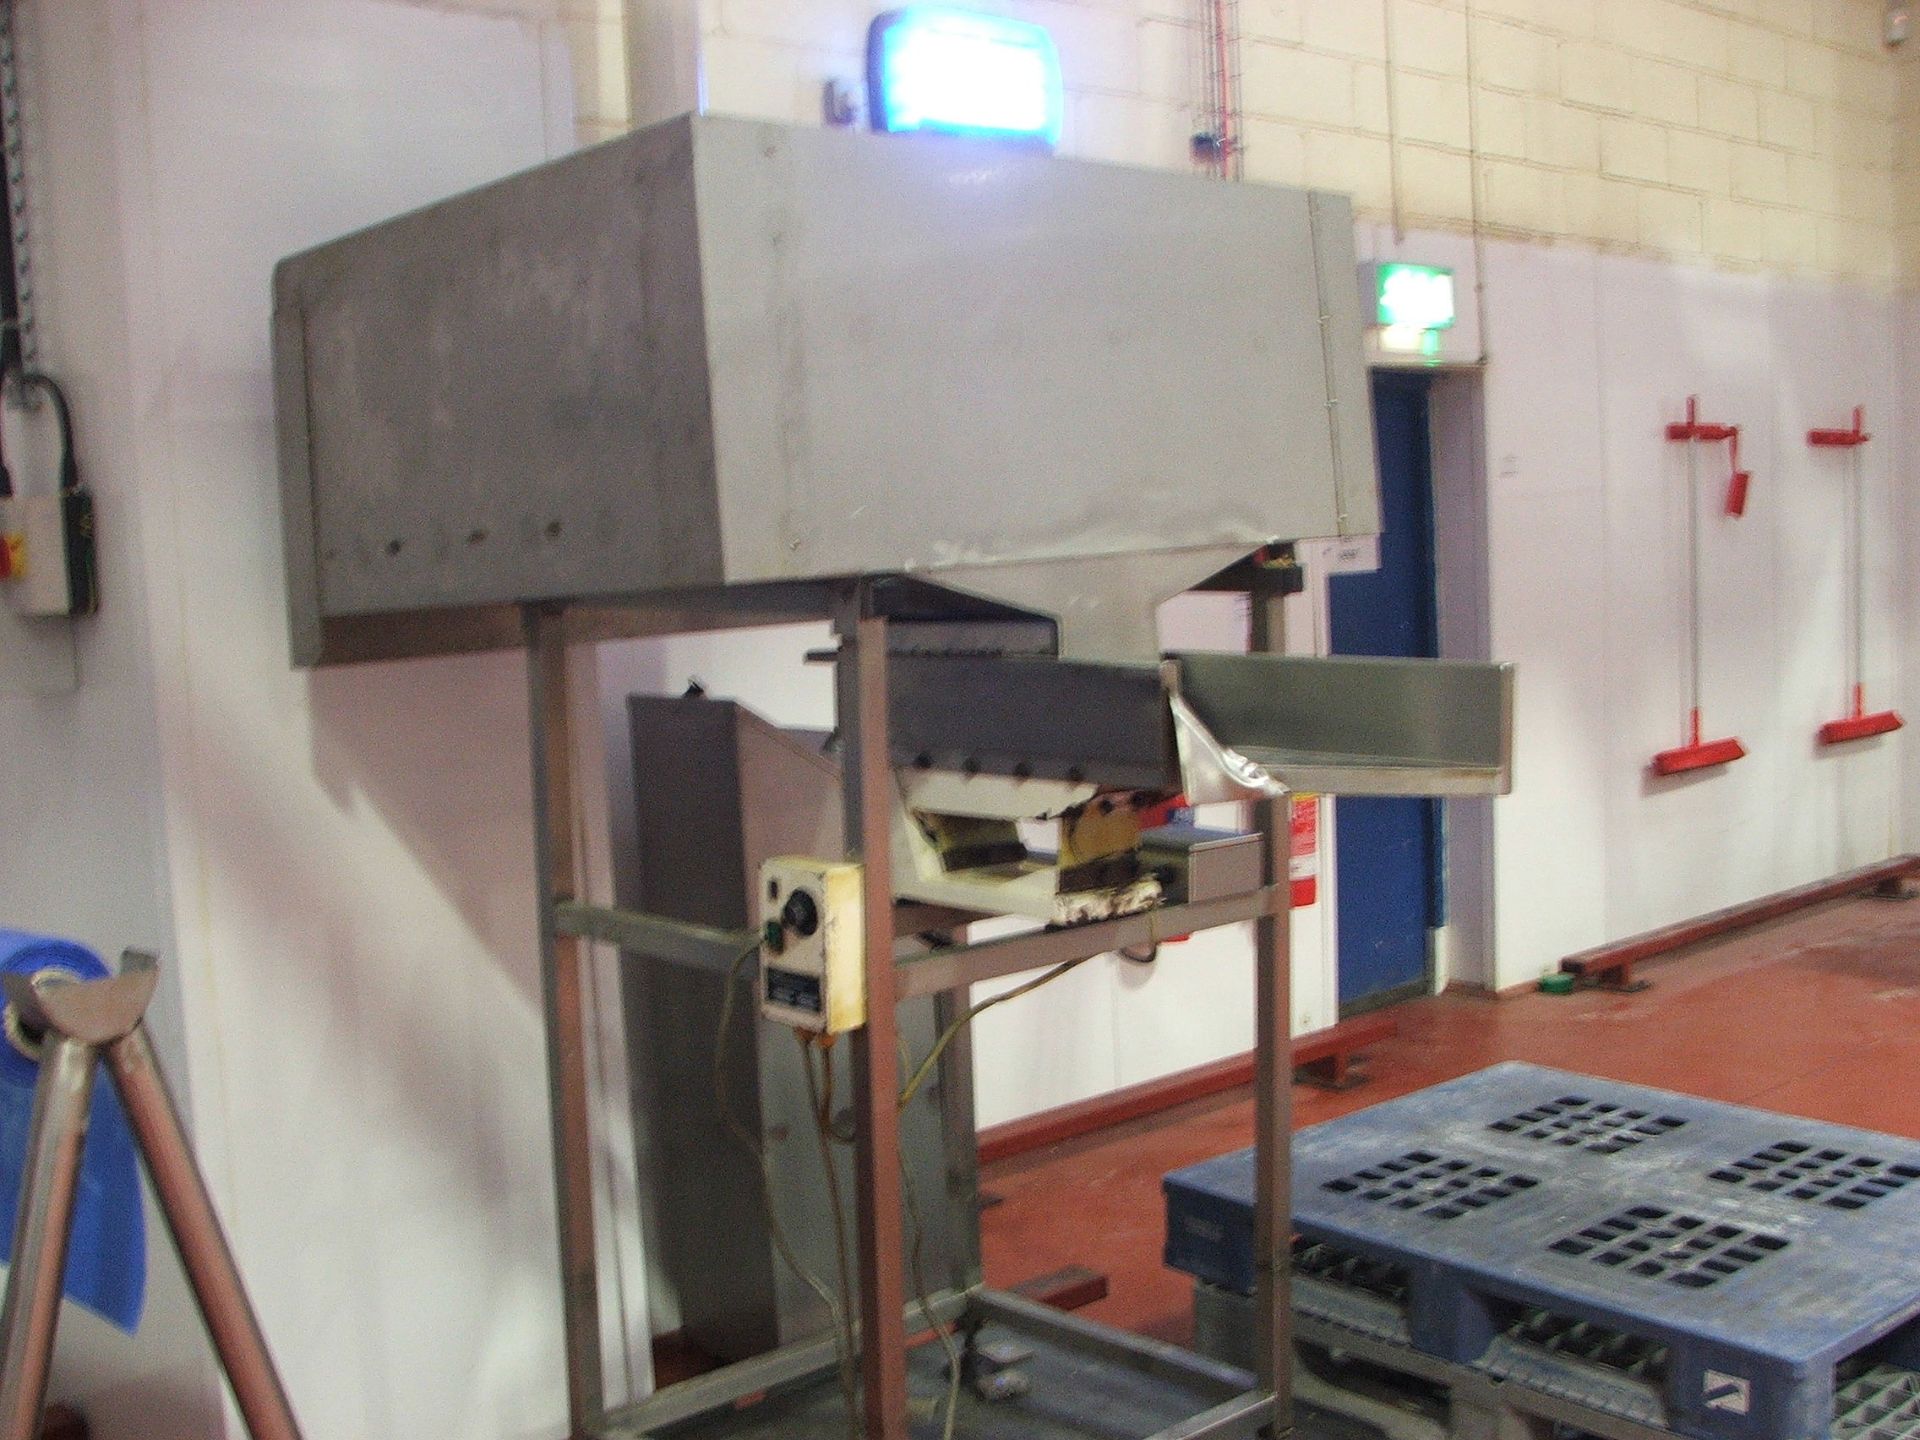 S/STEEL VIBRATORY HOPPER FEED UNIT ON STEEL STAND 1 MTR X 1 MTR X 500 SPARES OR REPAIRS REQUIRES